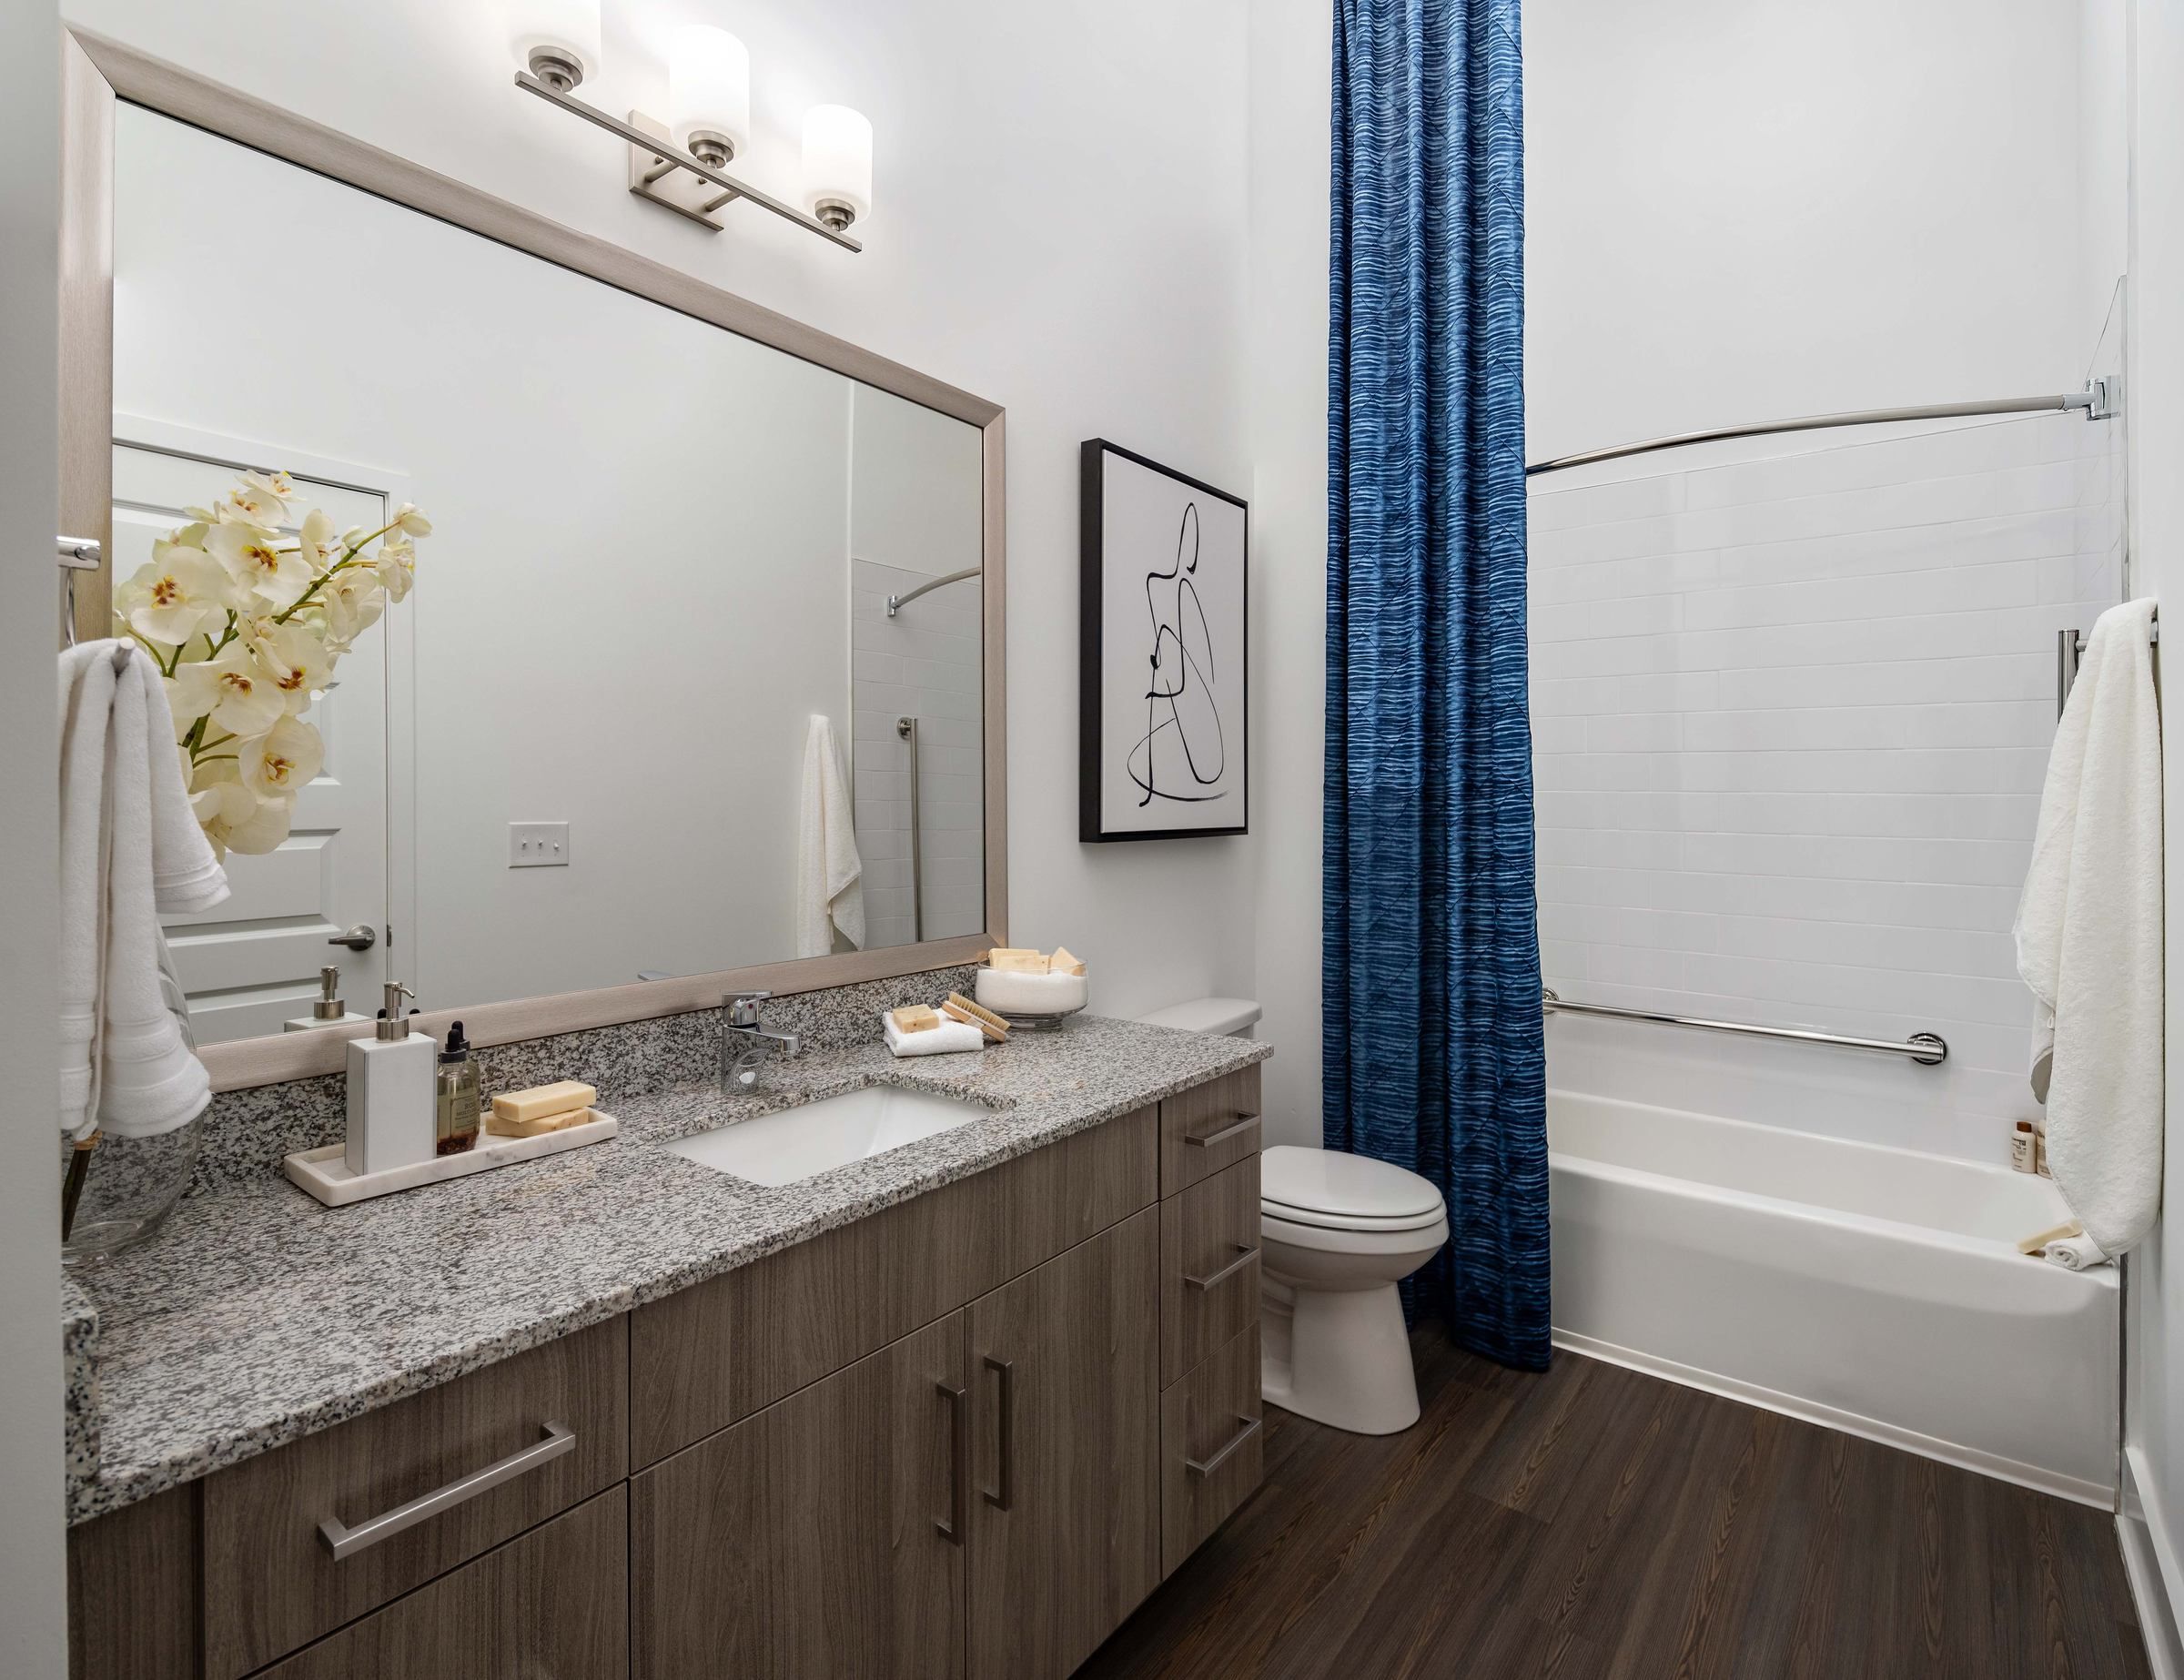 The bathroom at Alta Ashley Park, featuring a granite countertop, large mirror, and a blue shower curtain that adds a pop of color to the neutral-toned space.